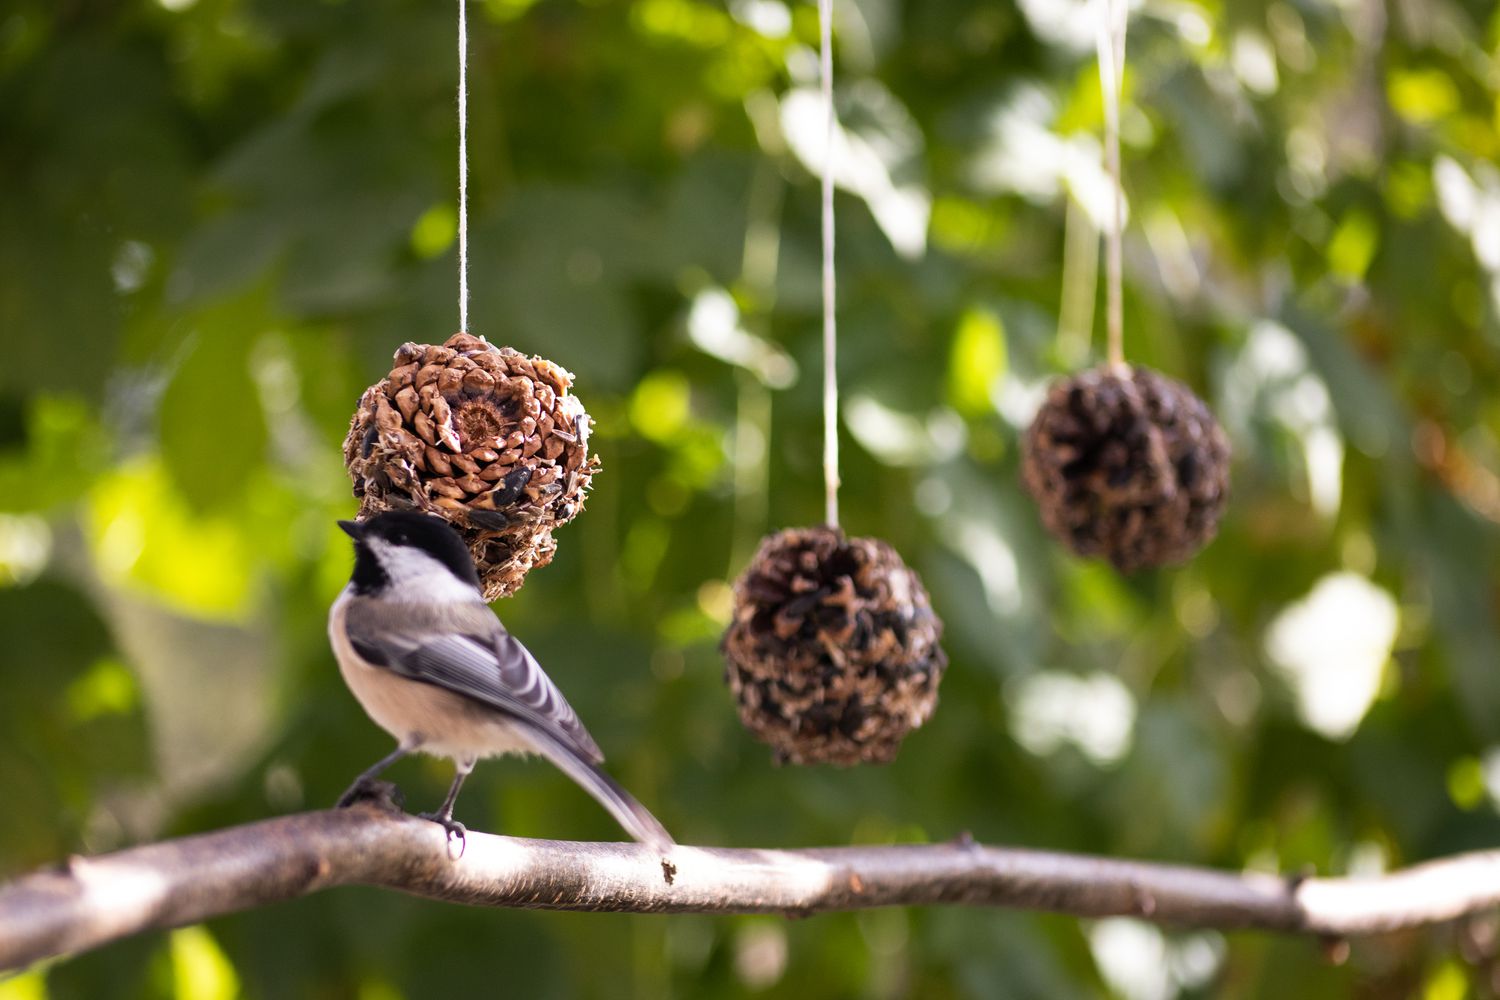 Pine cone bird feeders hanging from string next to bird on branch